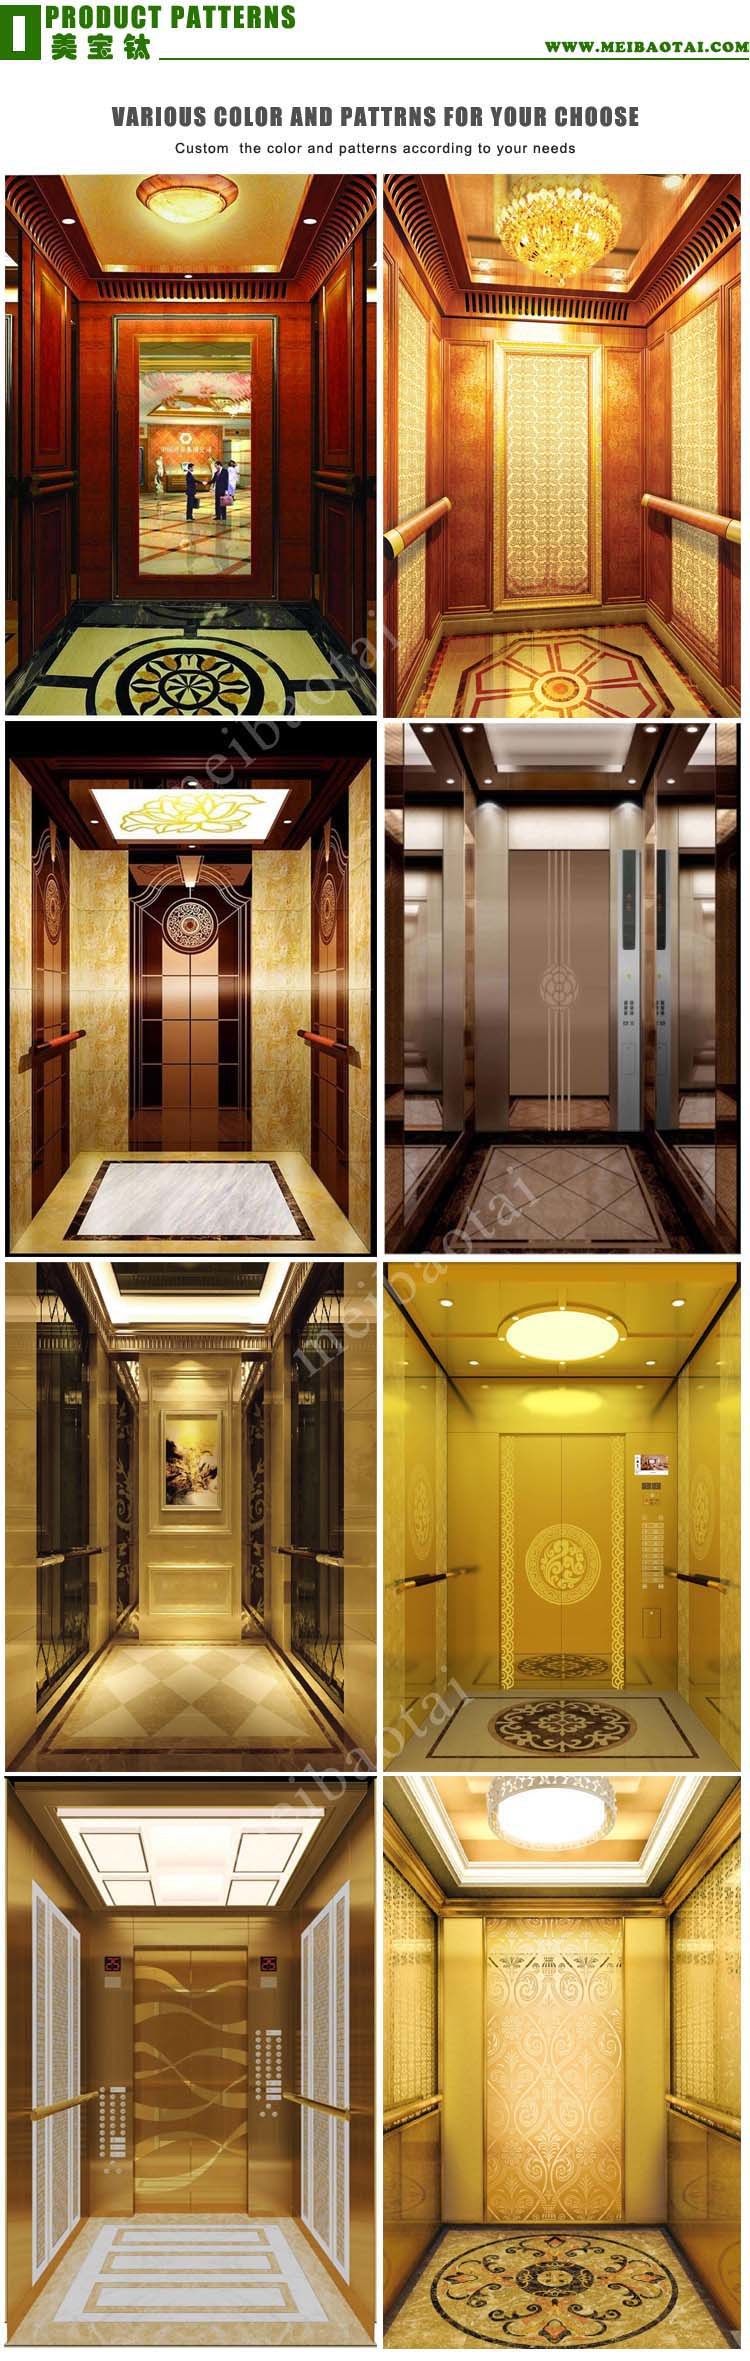 Popular Products Grade 201j1 J2 Stainless Steel Mirror Polish Etching Finish 4X8 Feet 0.95mm Hotel Elevator Decorative Door Plate Export to Egypt